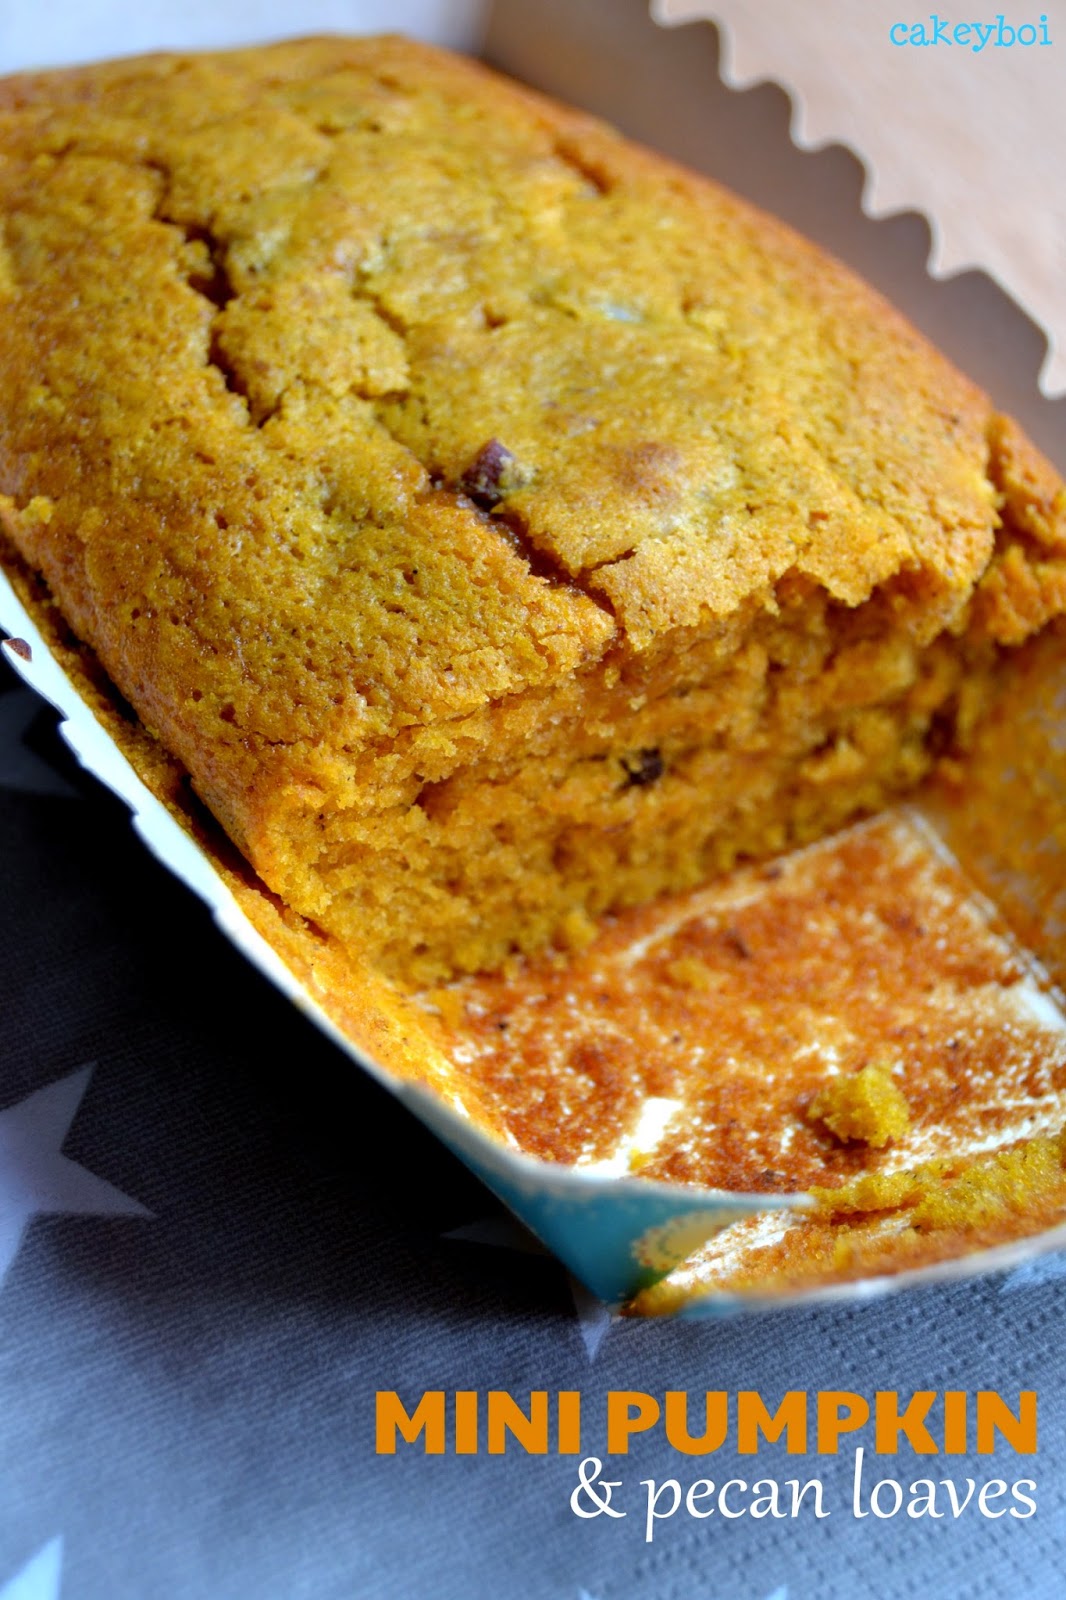 spiced pumpkin cake with pecan nuts